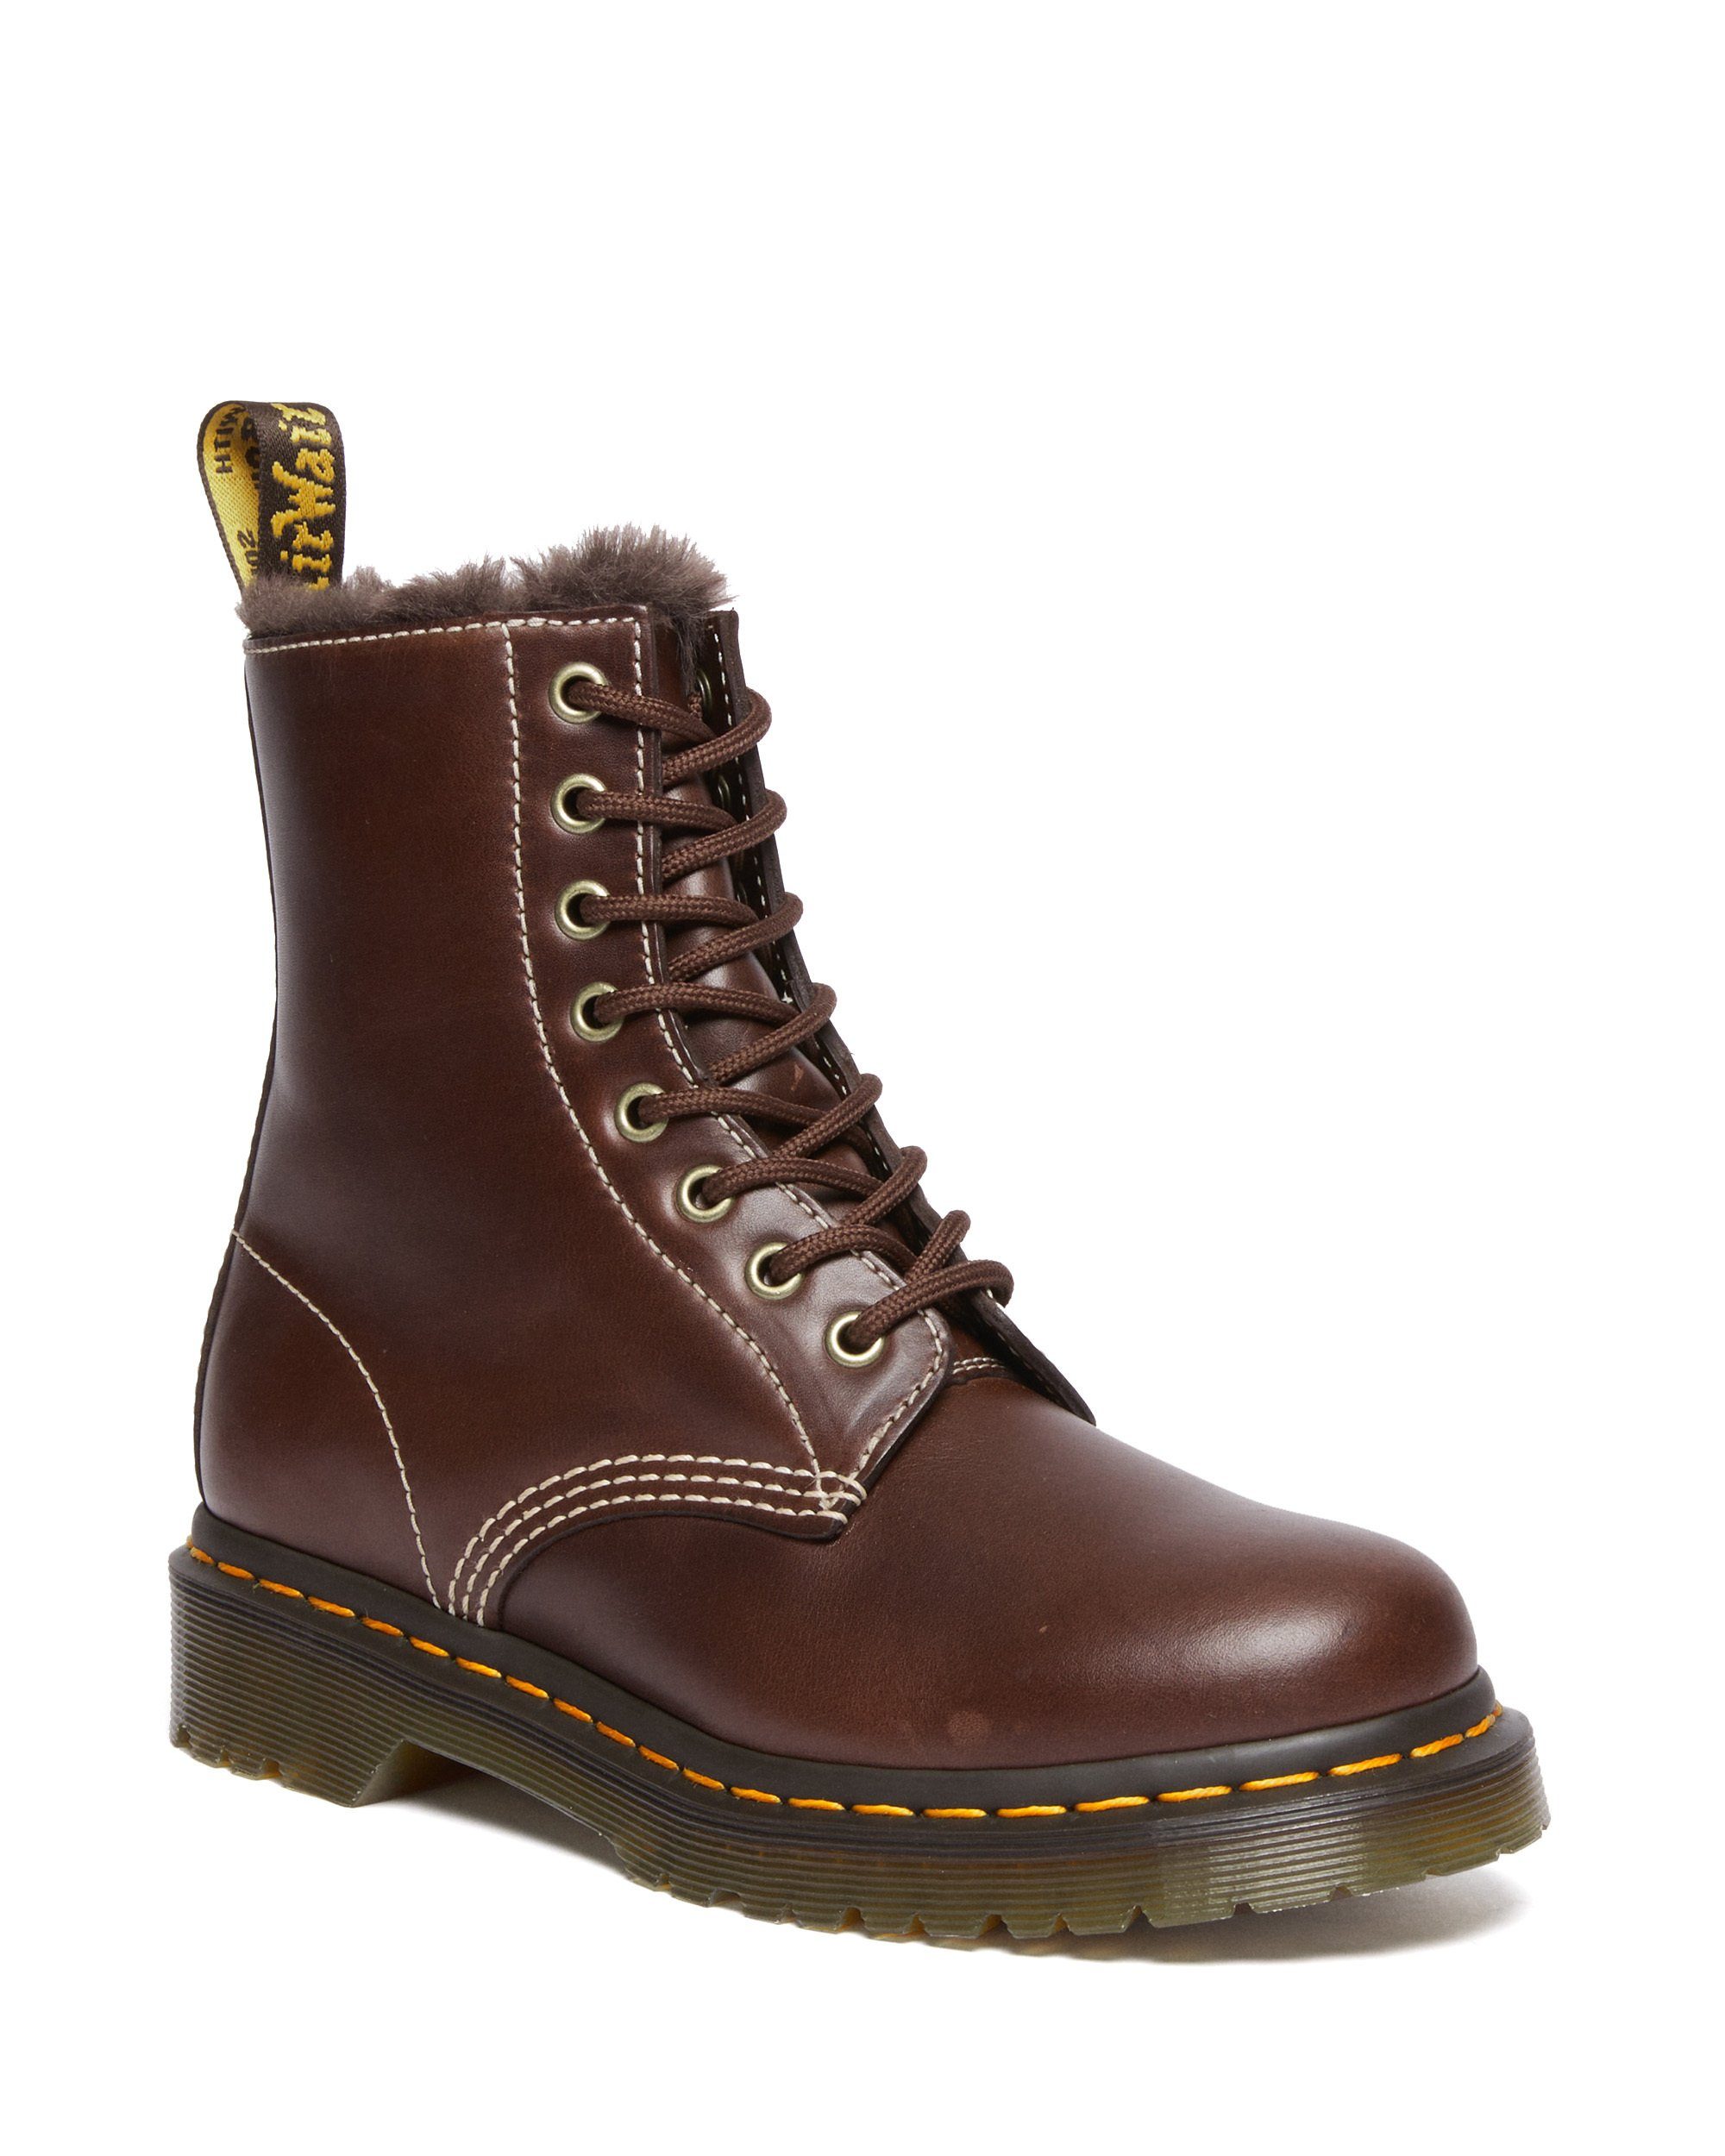 Ankleboots MARTENS SERENA 1460 (2-tlg) up Dunkelbraun DR. pull classic